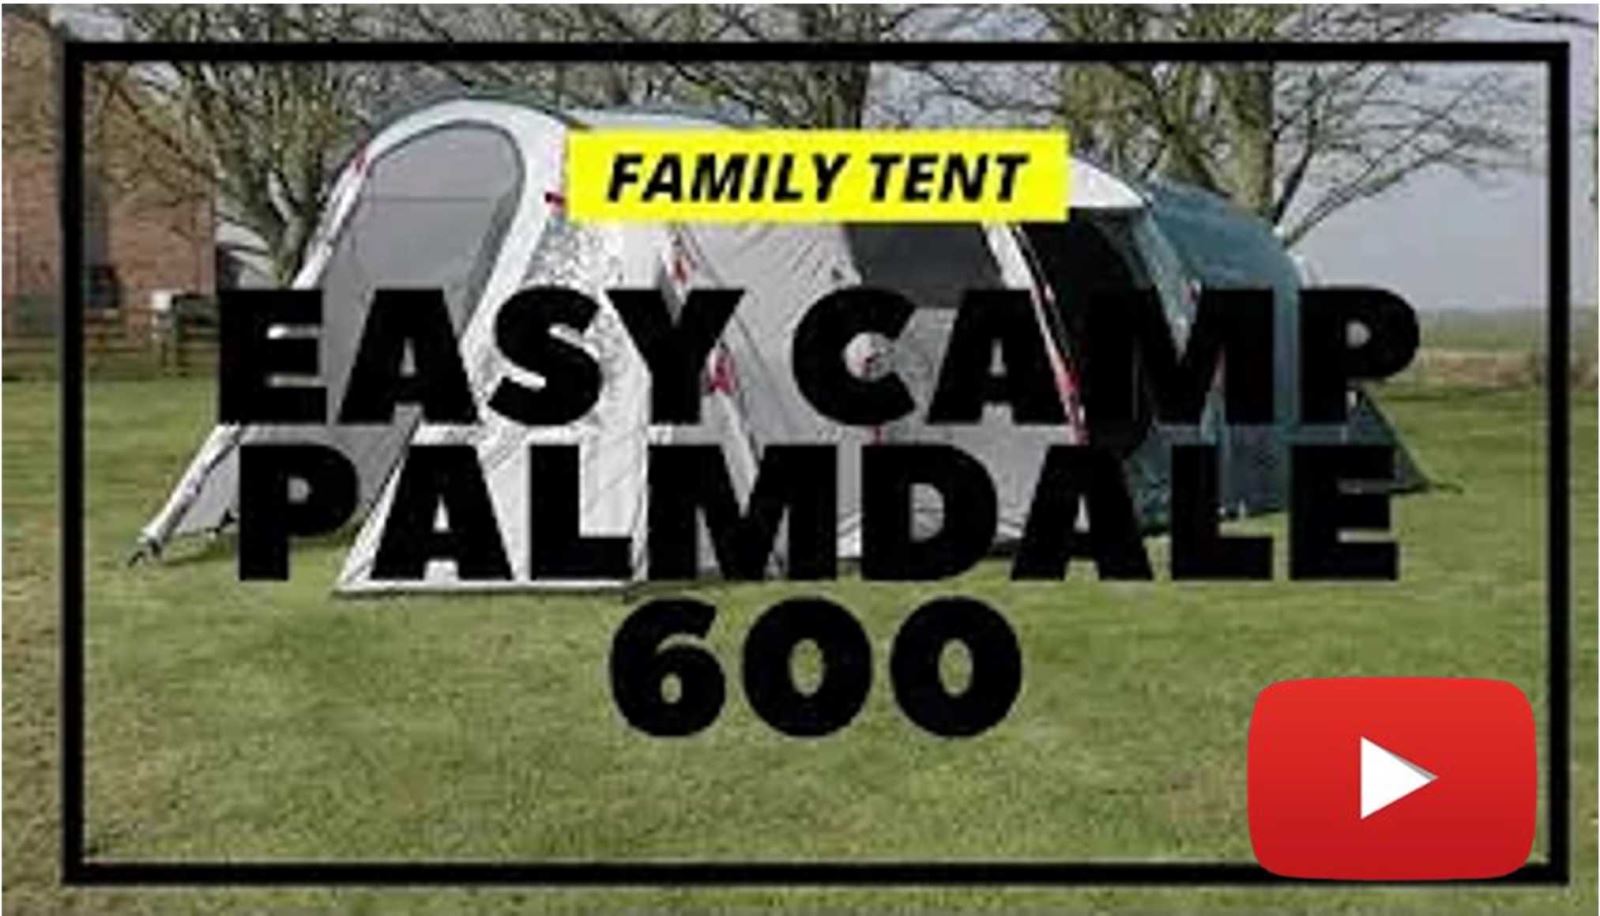 Easy Camp Palmdale 600 tent – a great value tent for families